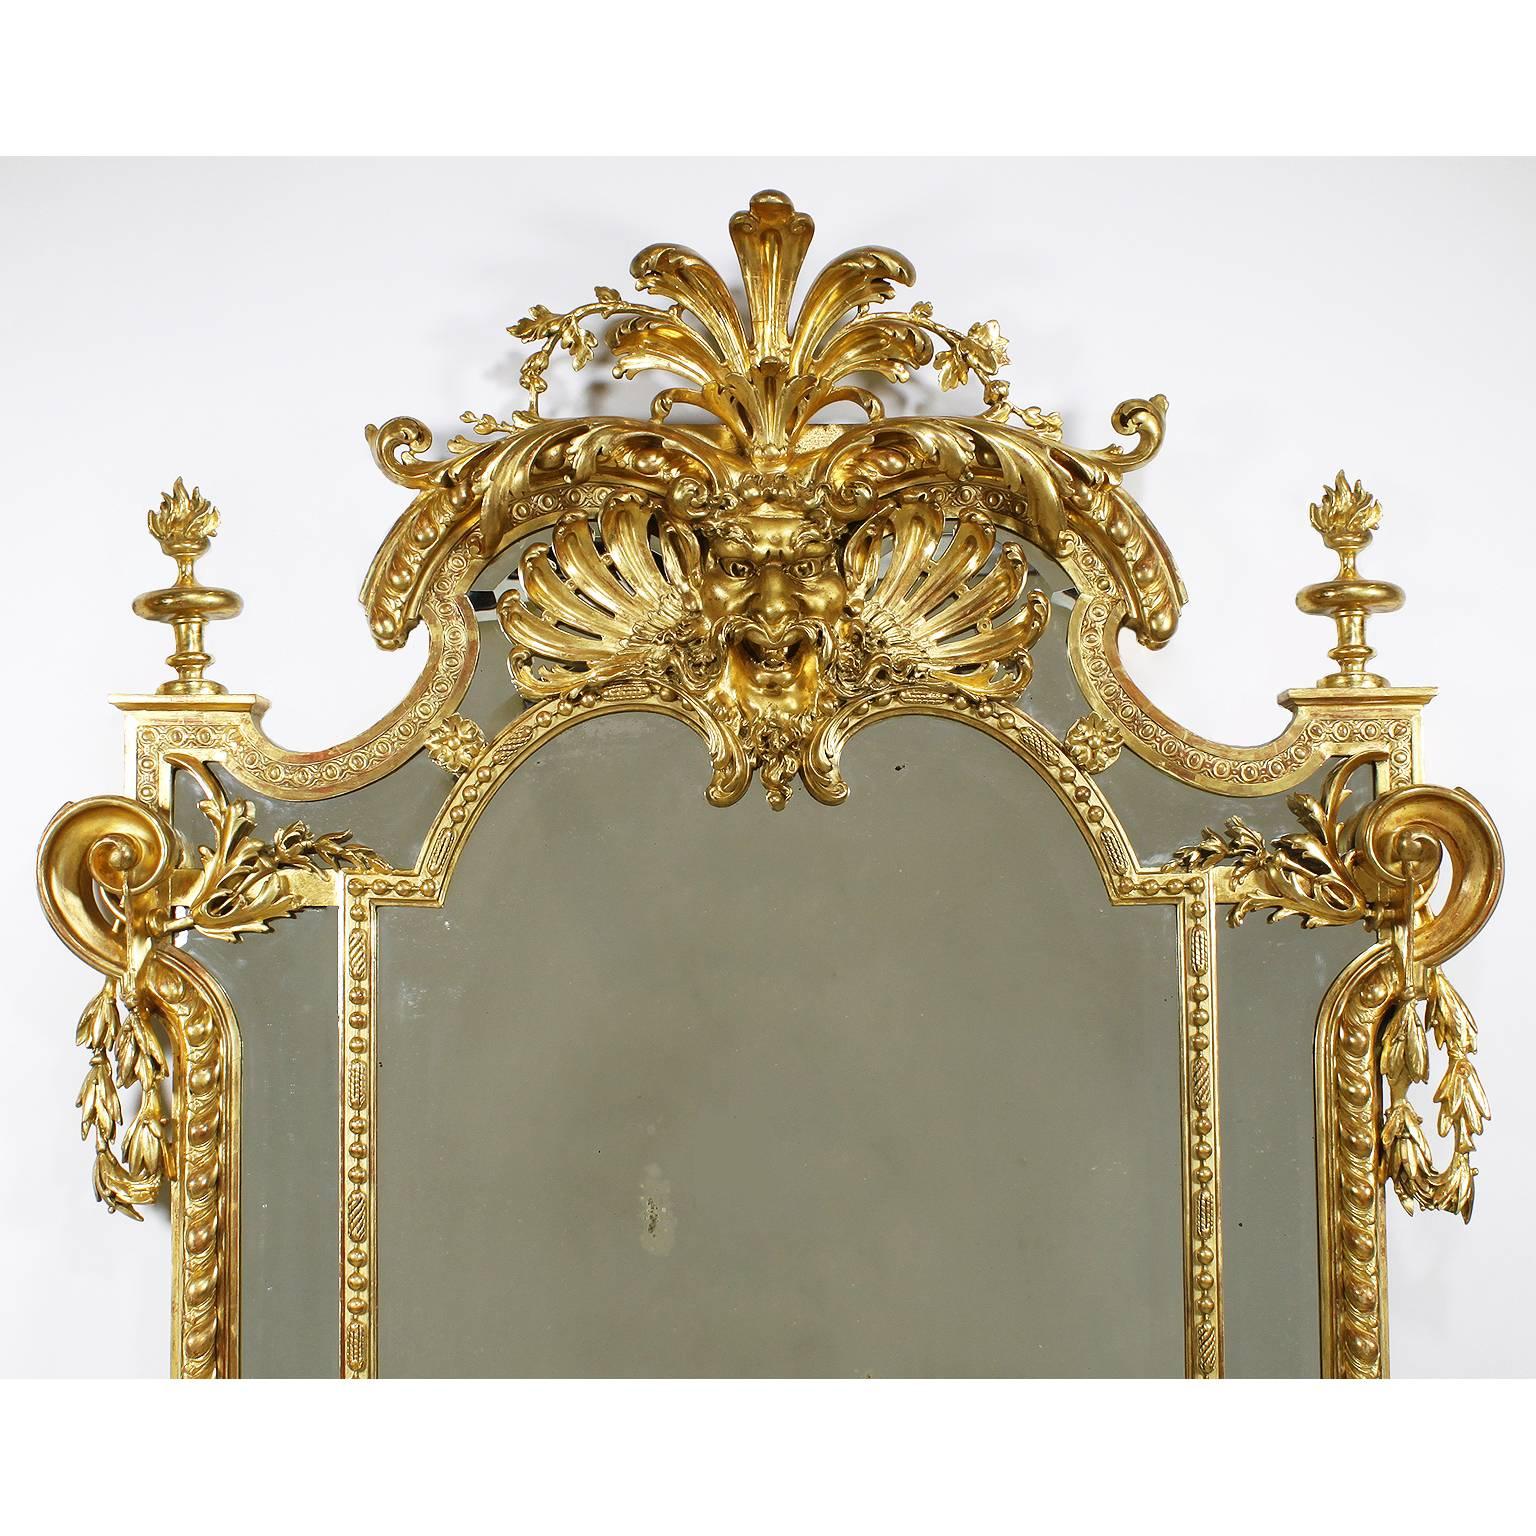 A very fine French Empire style 19th century Napoleon III giltwood and gesso carved figural mirror frame, flanked by a pair of sitting winged sphinxes, with carved scrolls, garlands and crowned with a pierced carved Satyr's mask with foliate swags